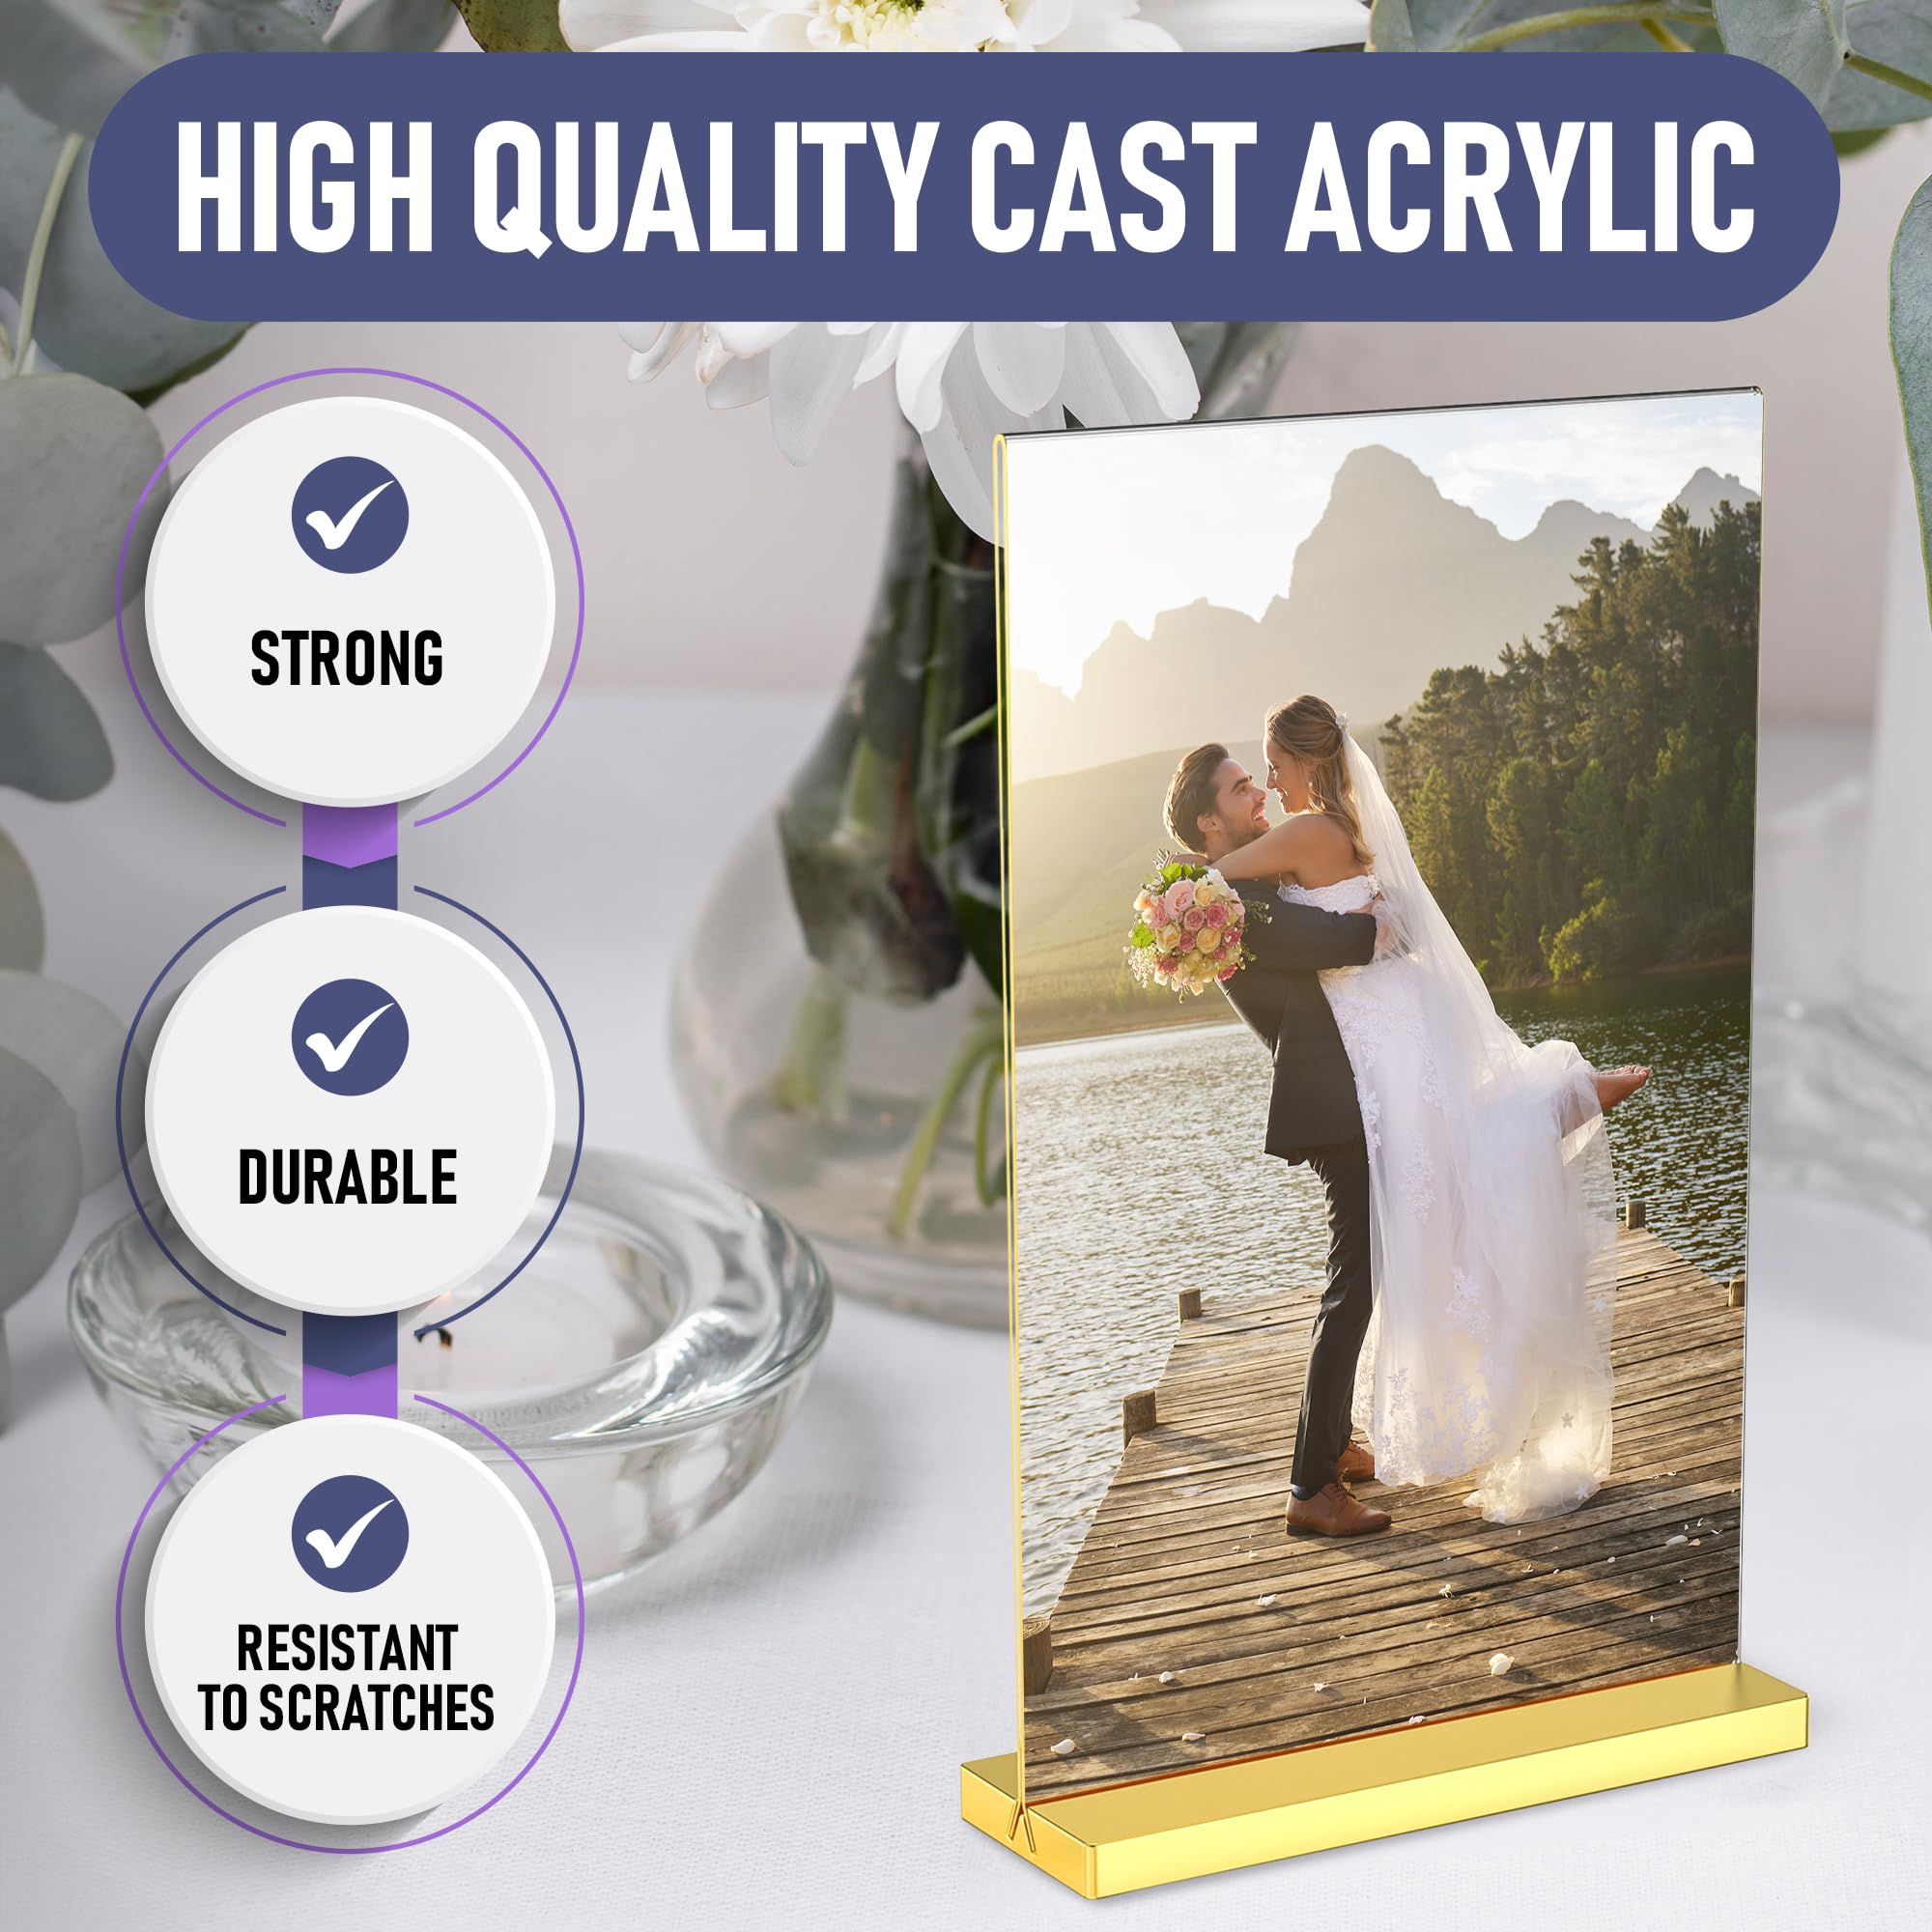  Acrylic Gold Sign Holder, 5x7 Gold Picture Frames